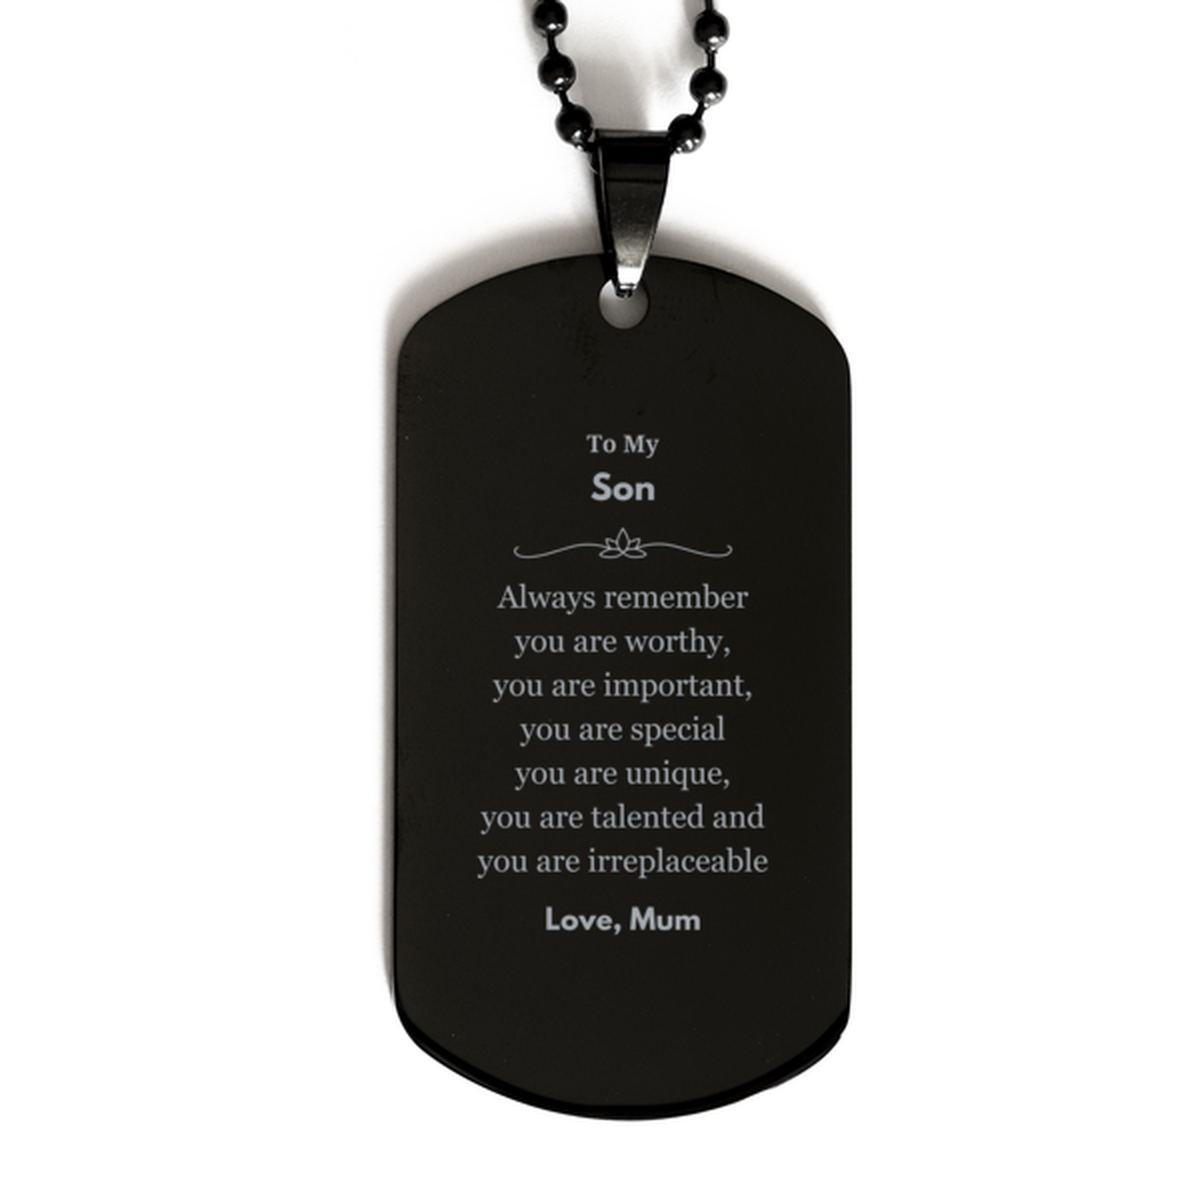 Son Birthday Gifts from Mum, Inspirational Black Dog Tag for Son Christmas Graduation Gifts for Son Always remember you are worthy, you are important. Love, Mum